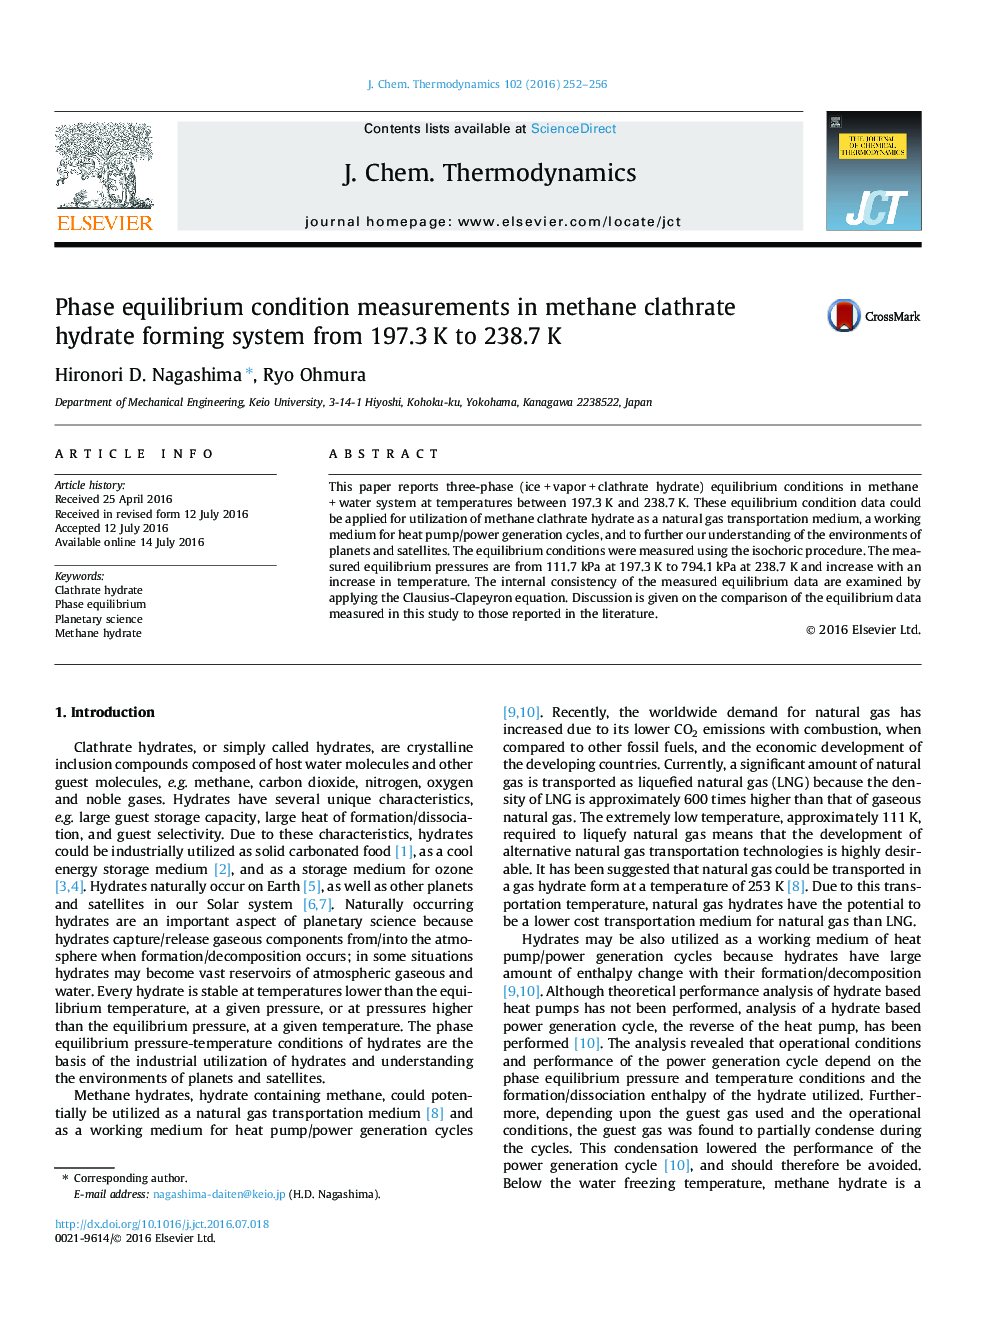 Phase equilibrium condition measurements in methane clathrate hydrate forming system from 197.3 K to 238.7 K